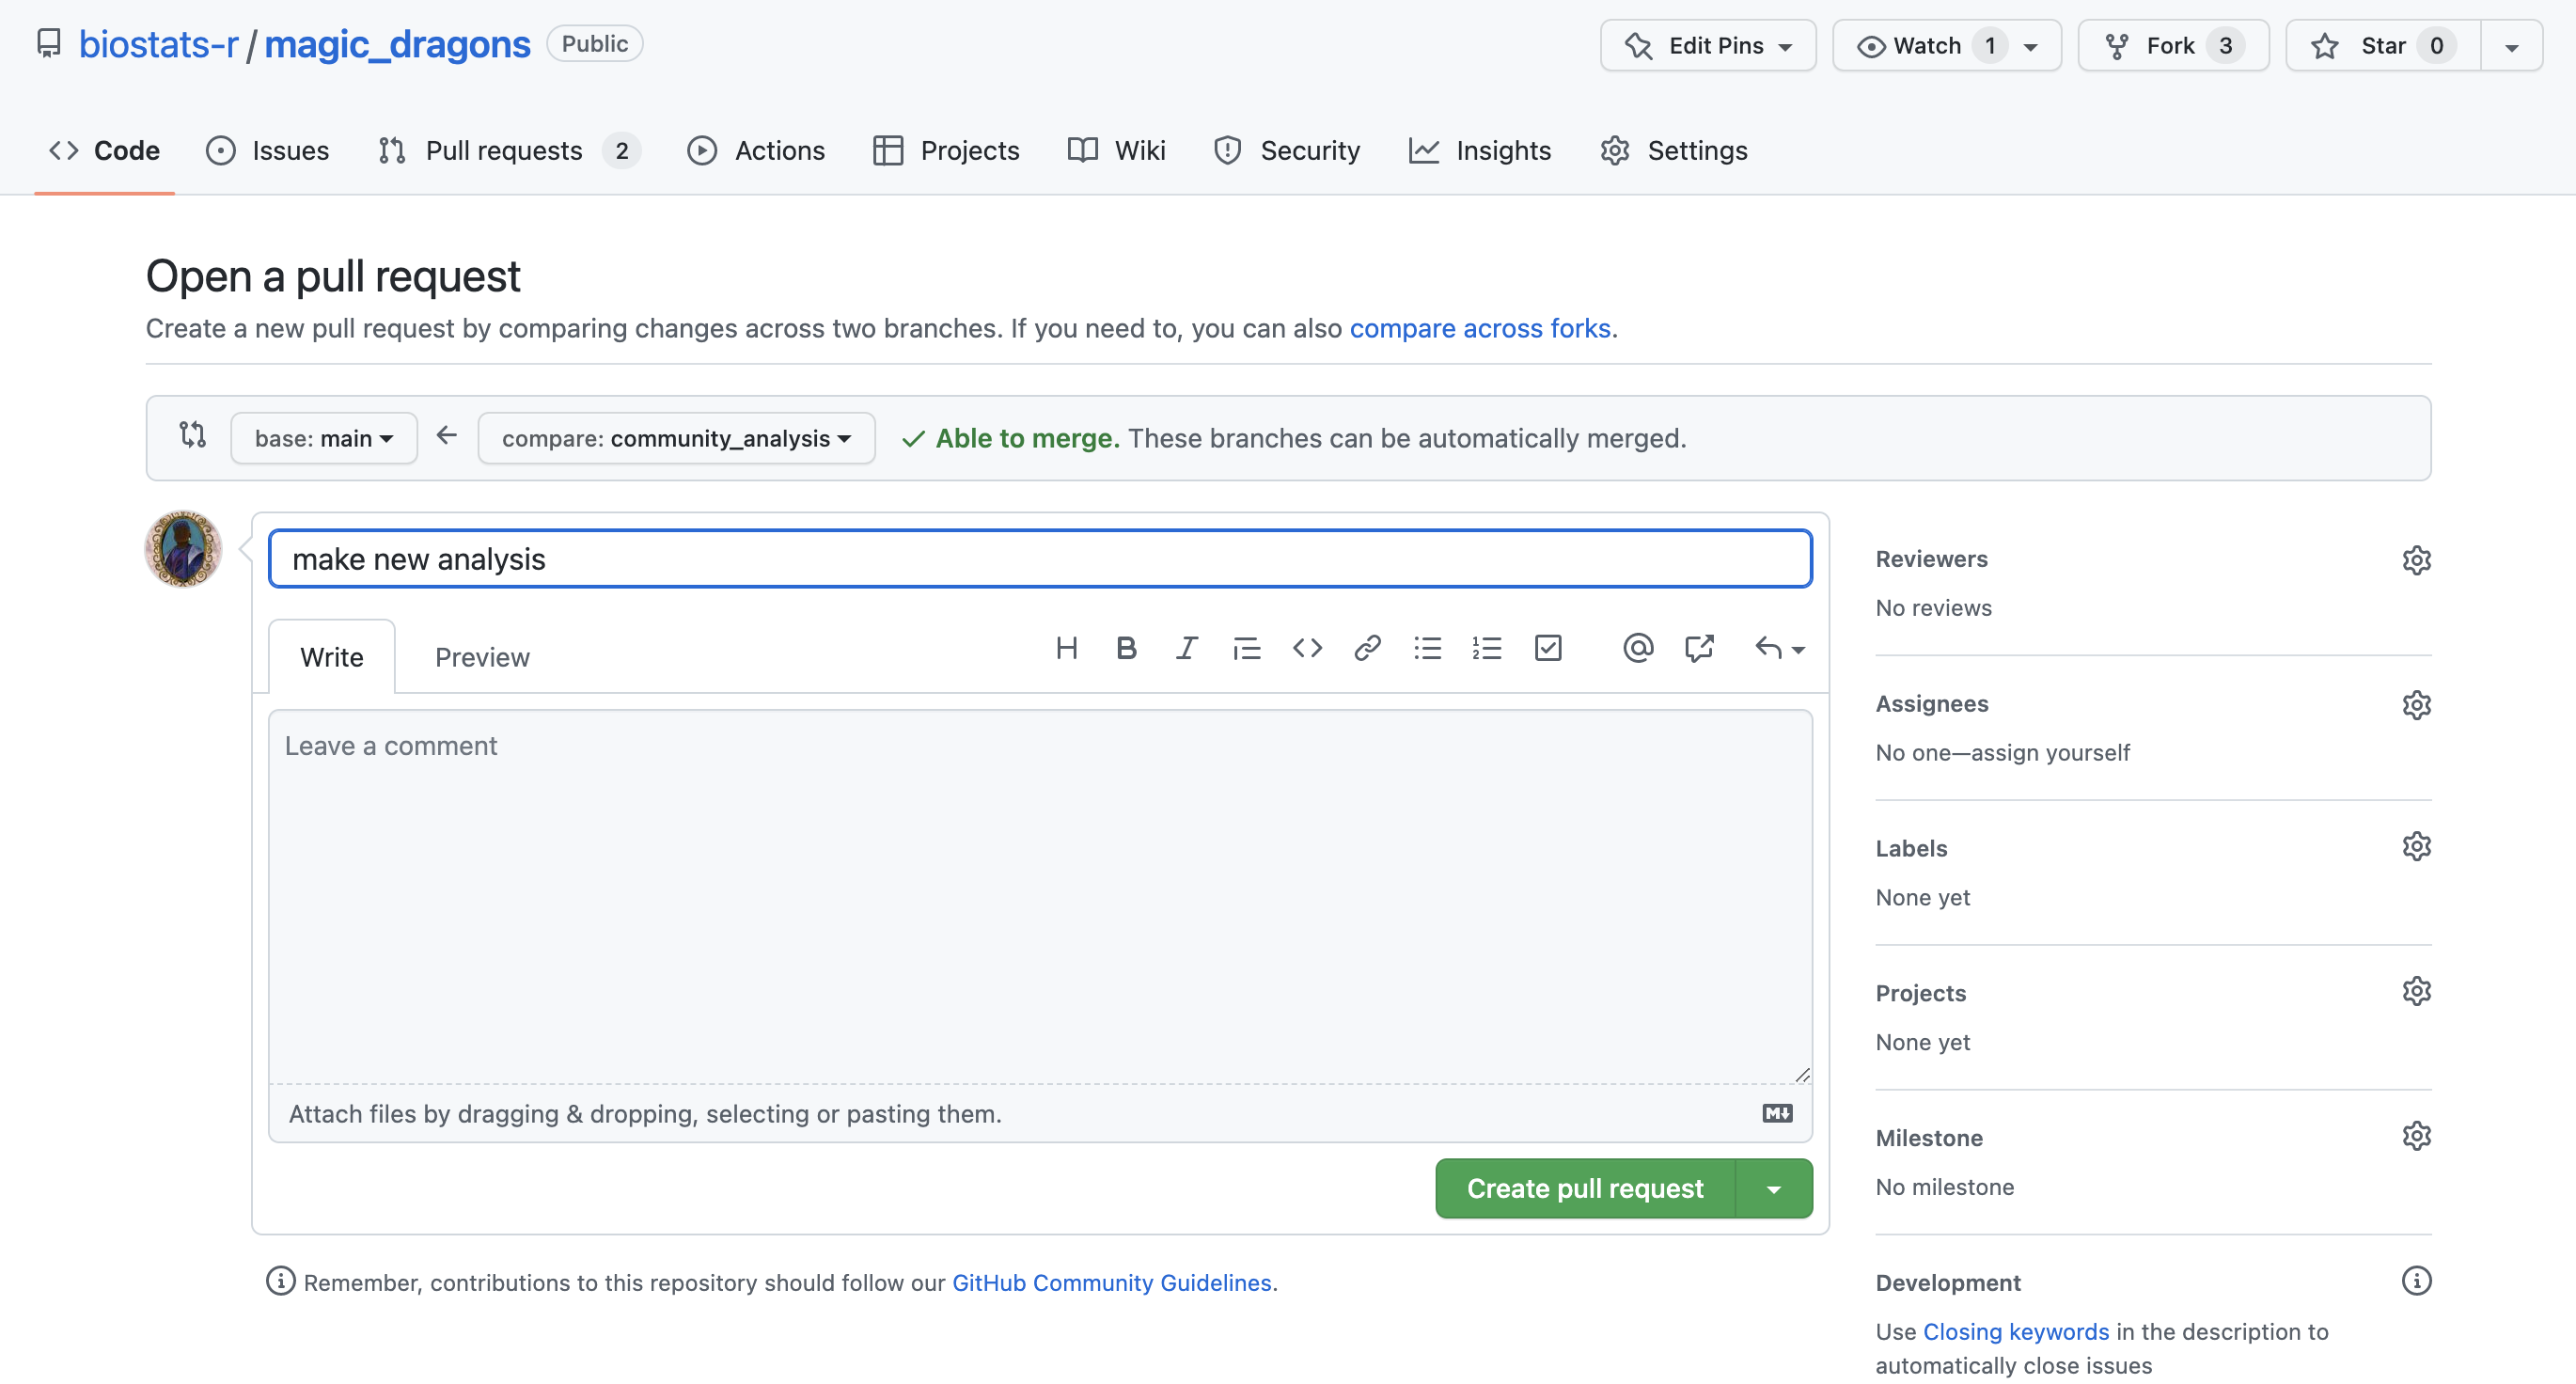 Screenshot of GitHub.com showing the Open a pull request page.